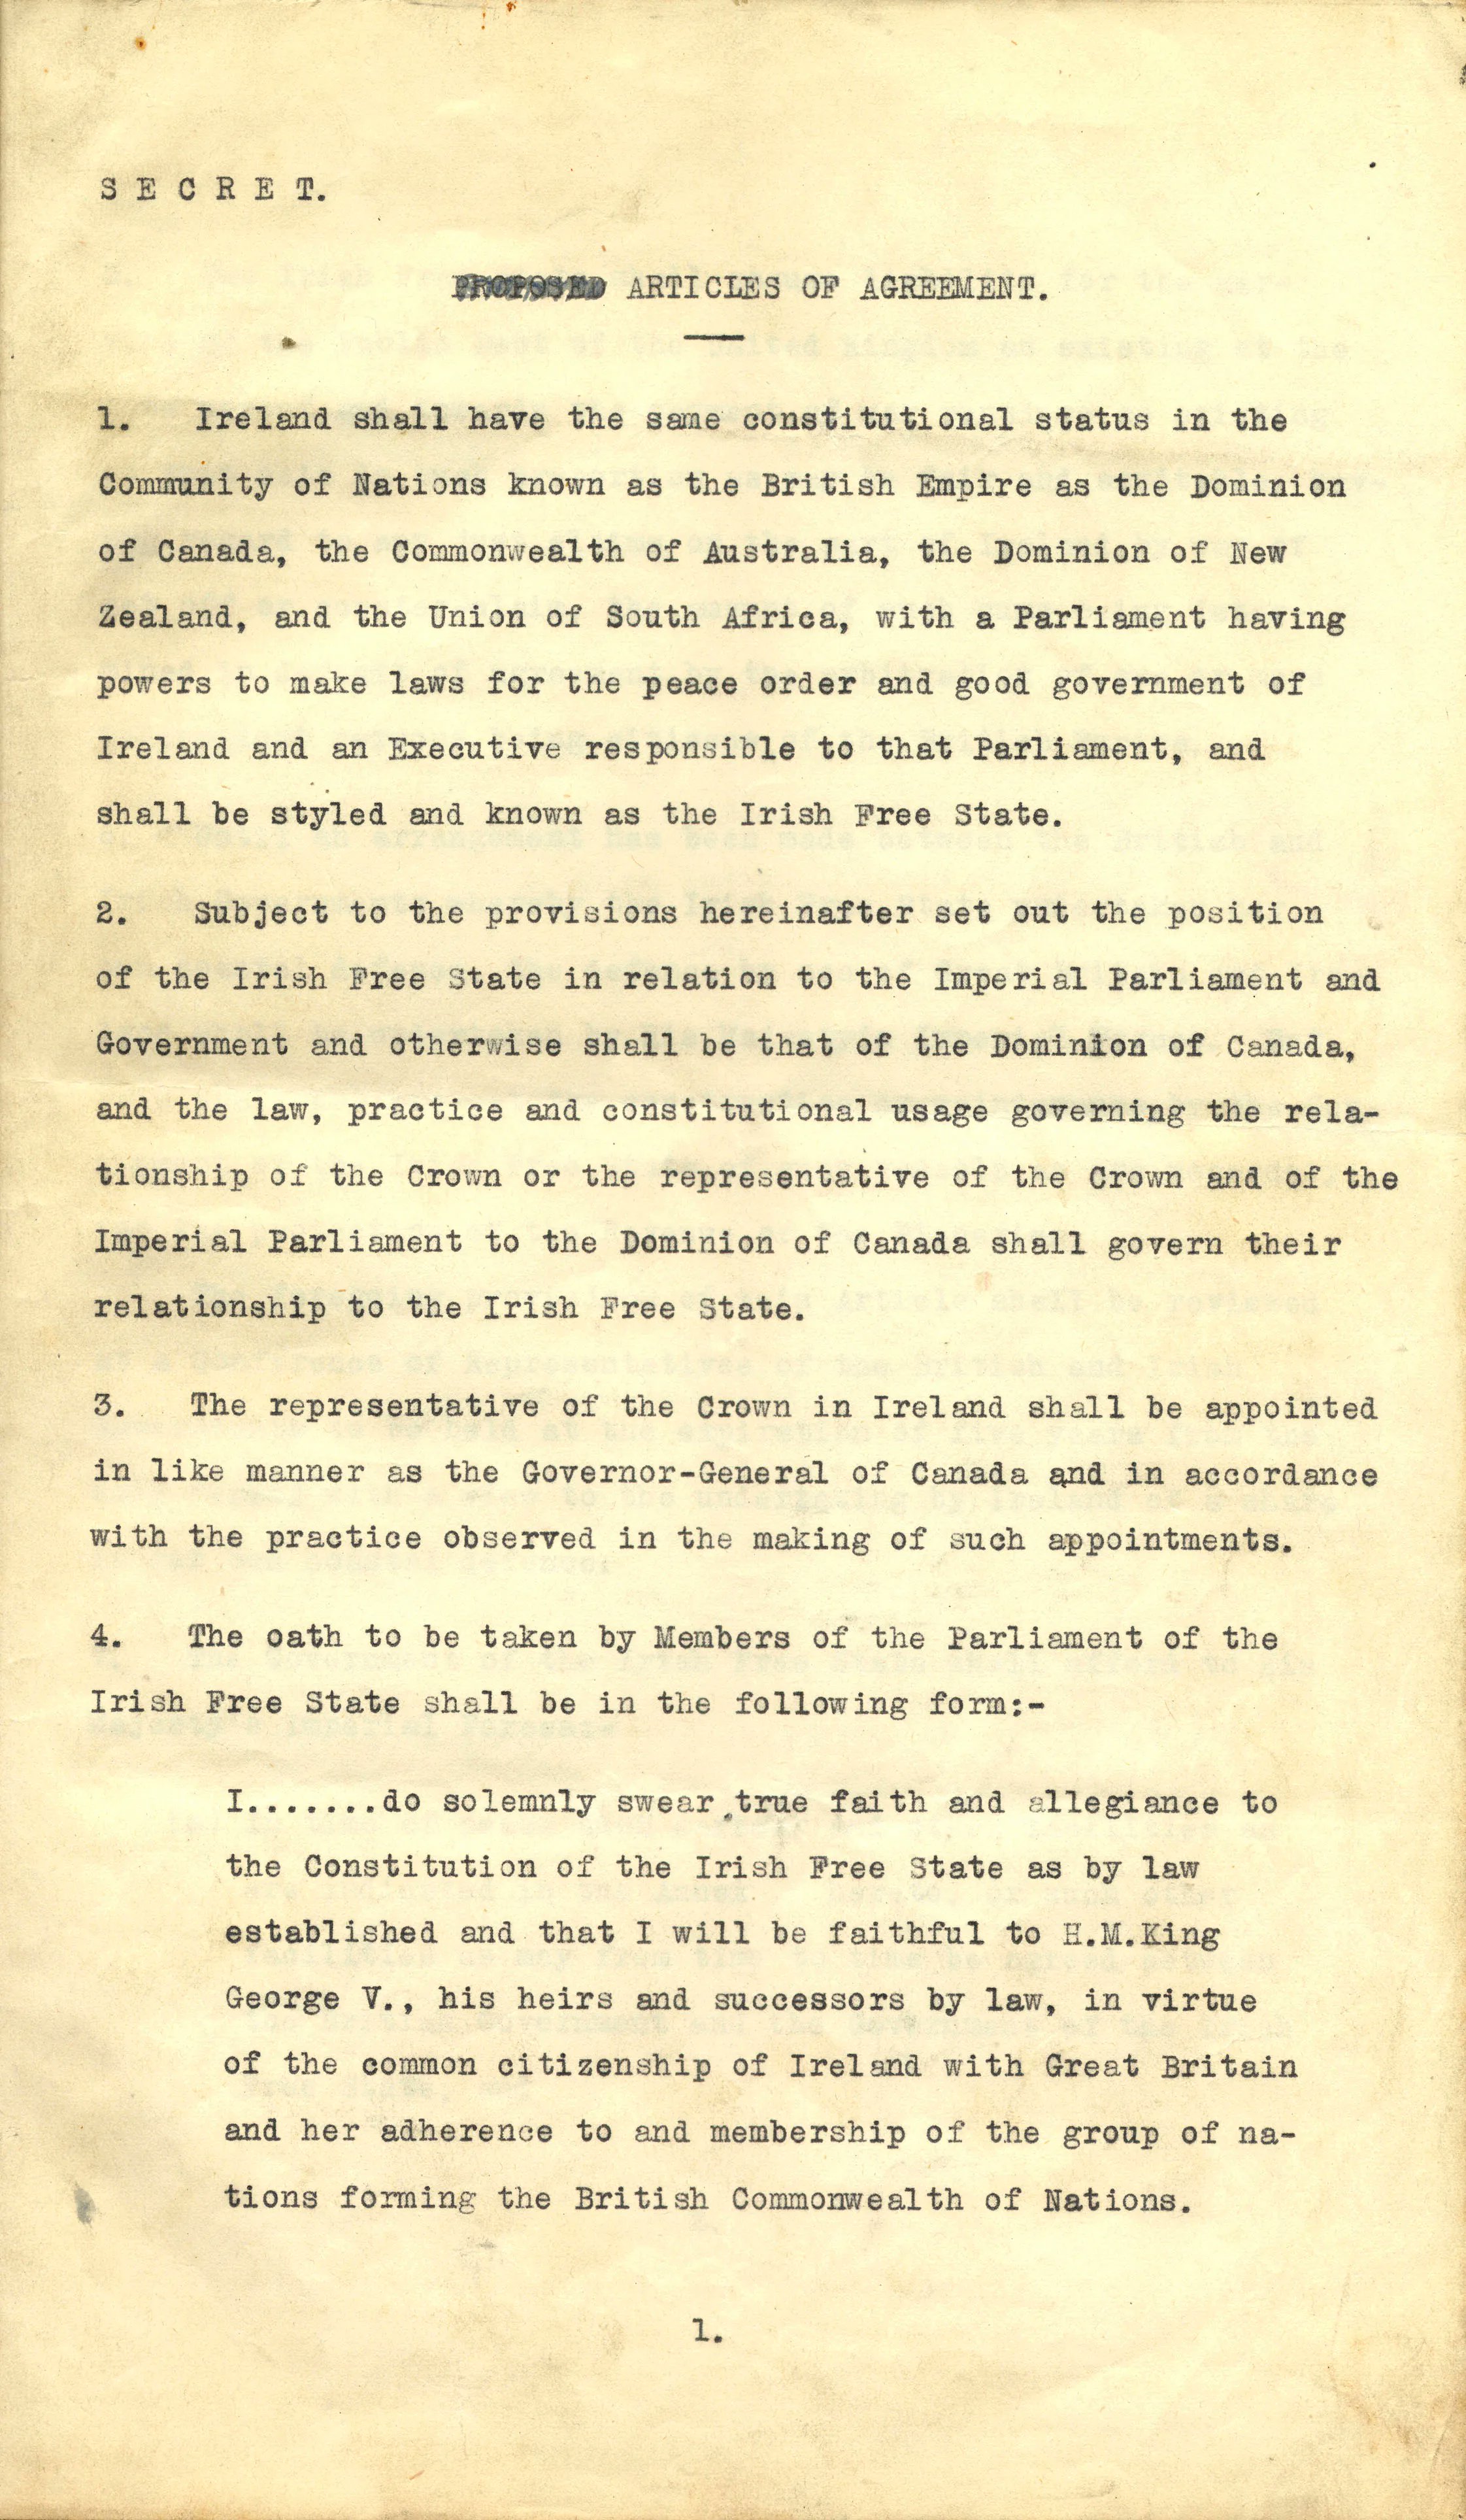 Irish Partition - The National Archives